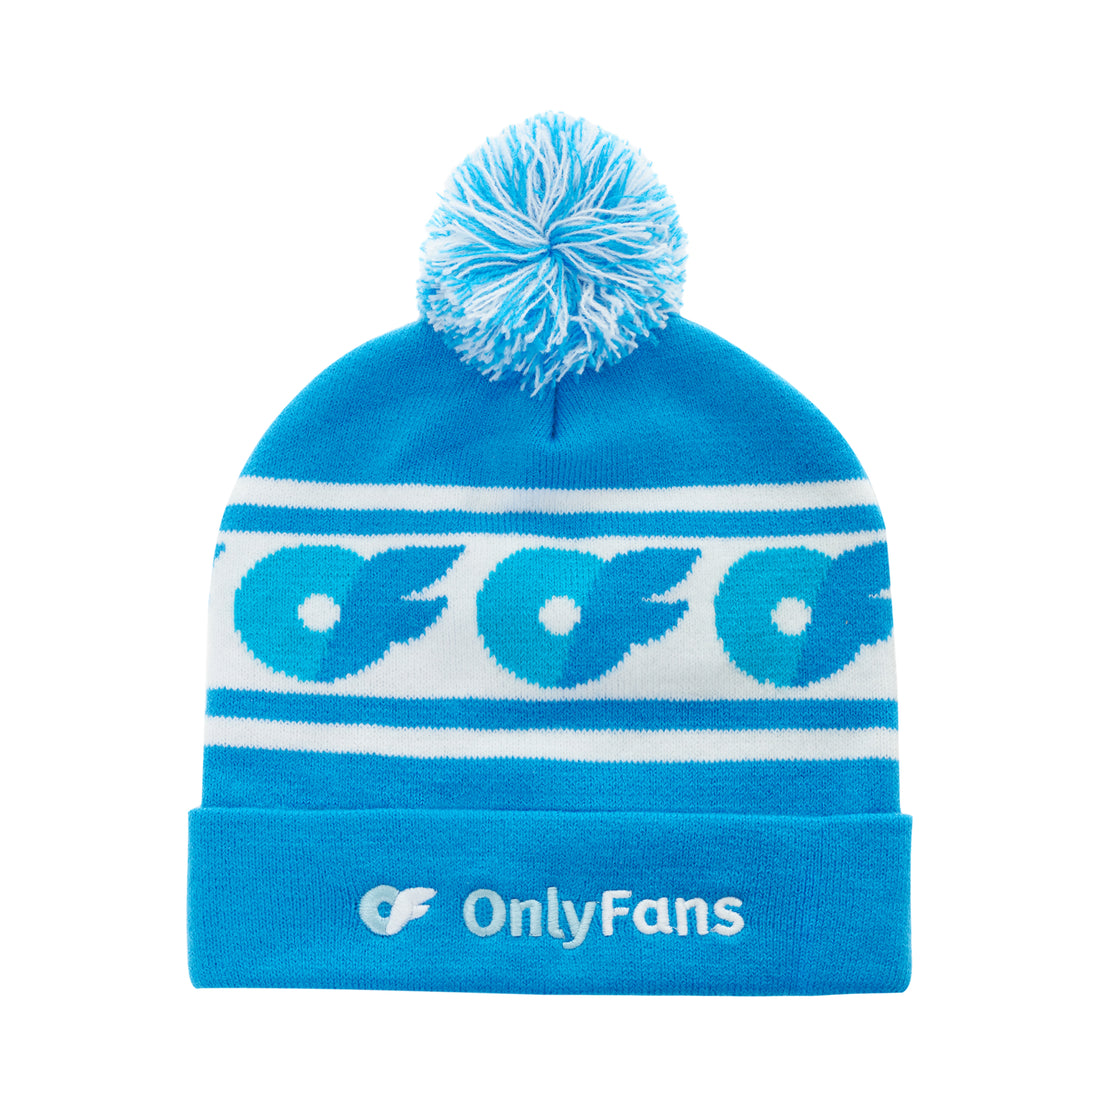 OnlyFans Patterned Beanie